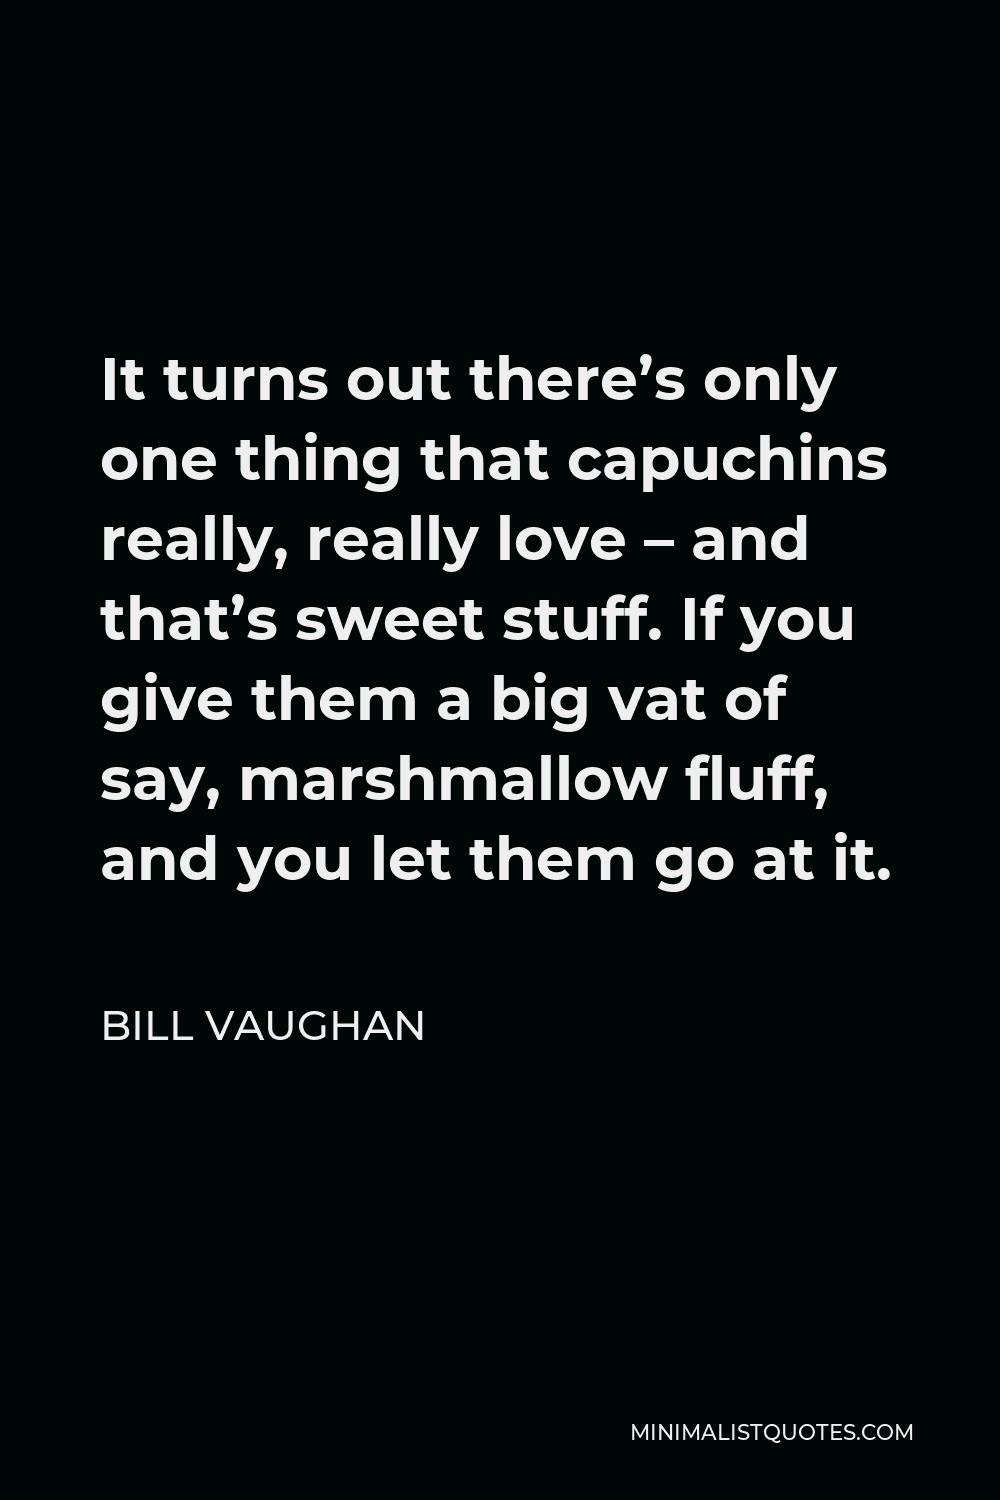 Bill Vaughan Quote - It turns out there’s only one thing that capuchins really, really love – and that’s sweet stuff. If you give them a big vat of say, marshmallow fluff, and you let them go at it.